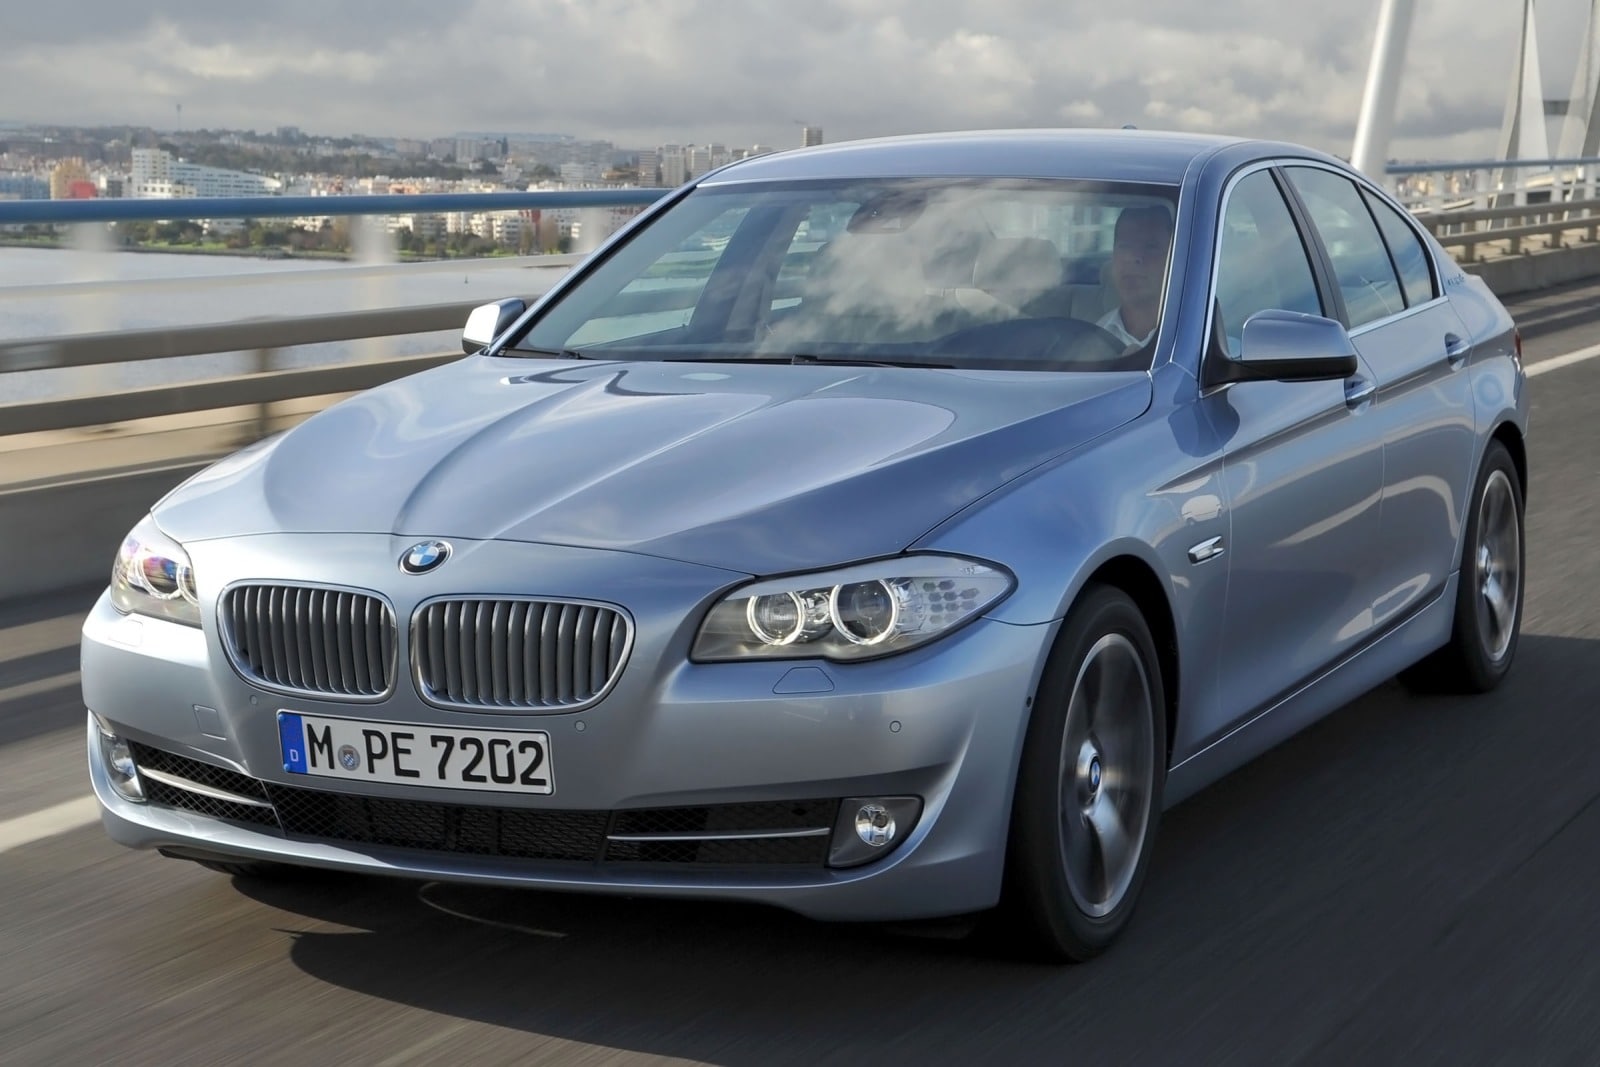 Used 2013 BMW 5 Series Hybrid Review | Edmunds